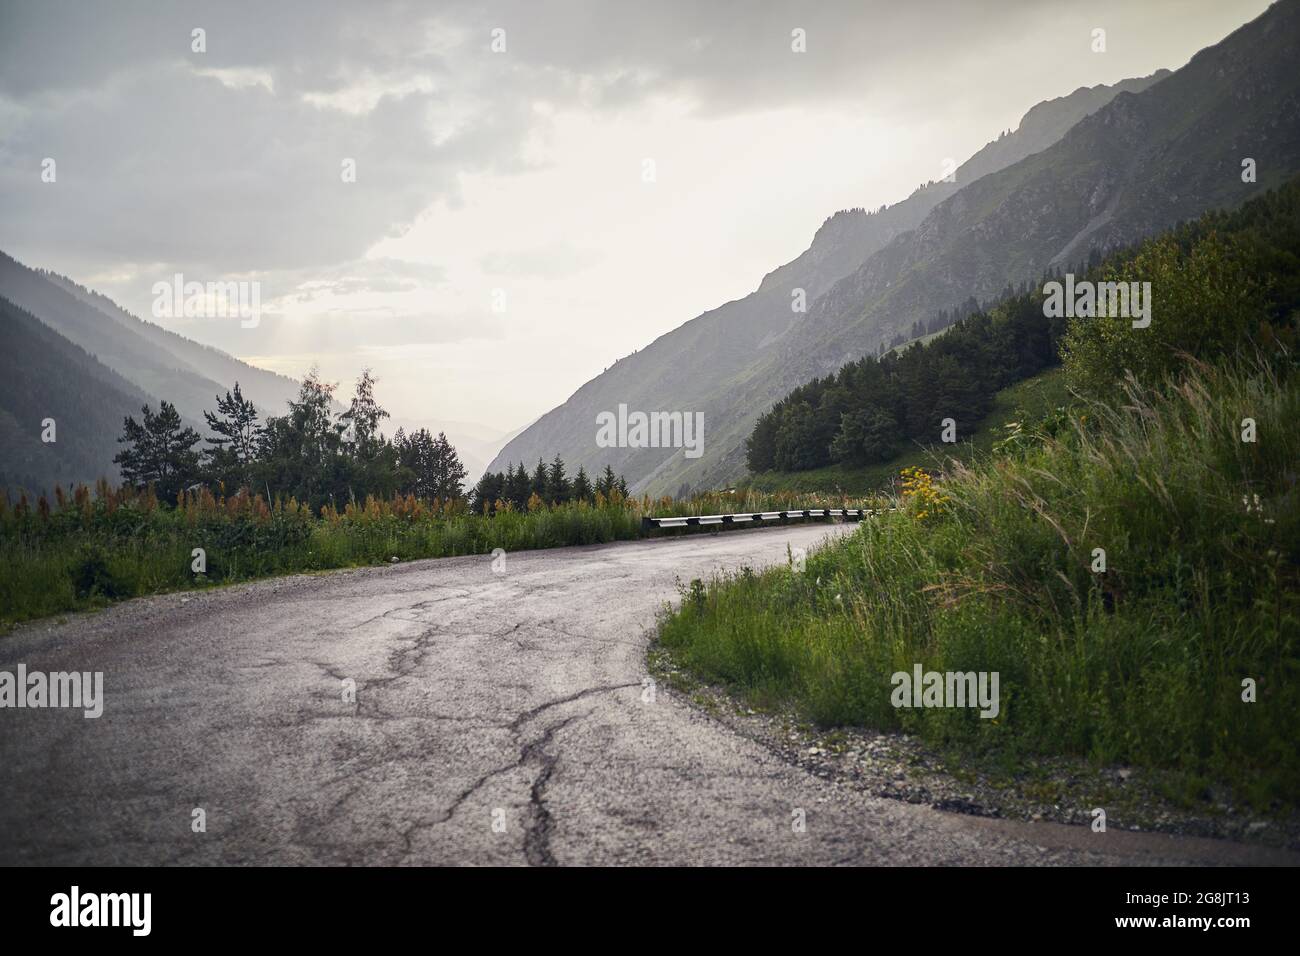 Asphalt road serpentine in the mountains in Kazakhstan. Famous mountain road to Big Almaty Lake. Stock Photo